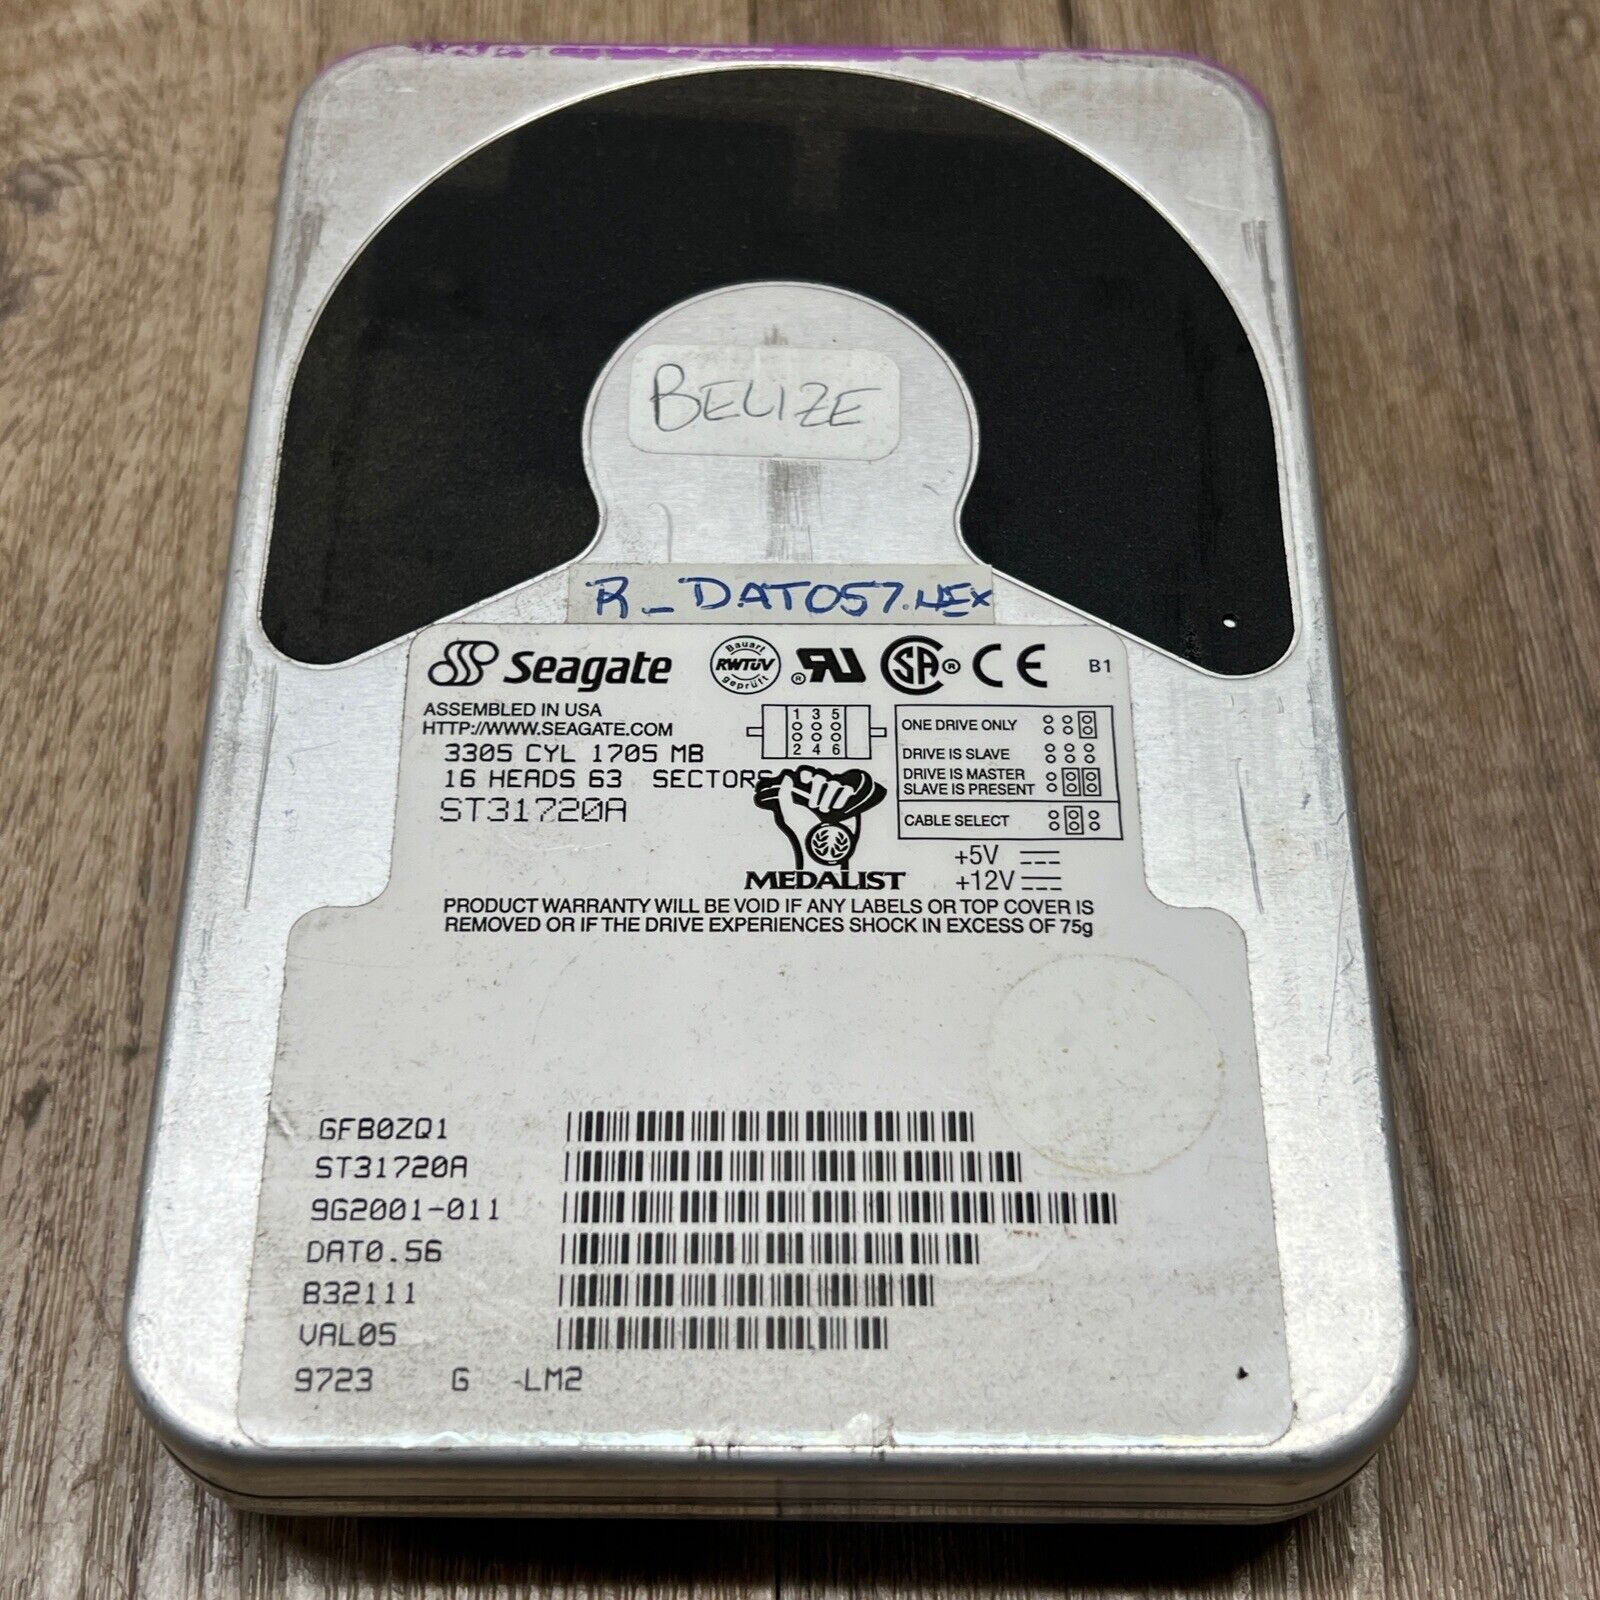 Seagate Medalist ST31720A Vintage Hard Drive 3305 CYL 1705 MB